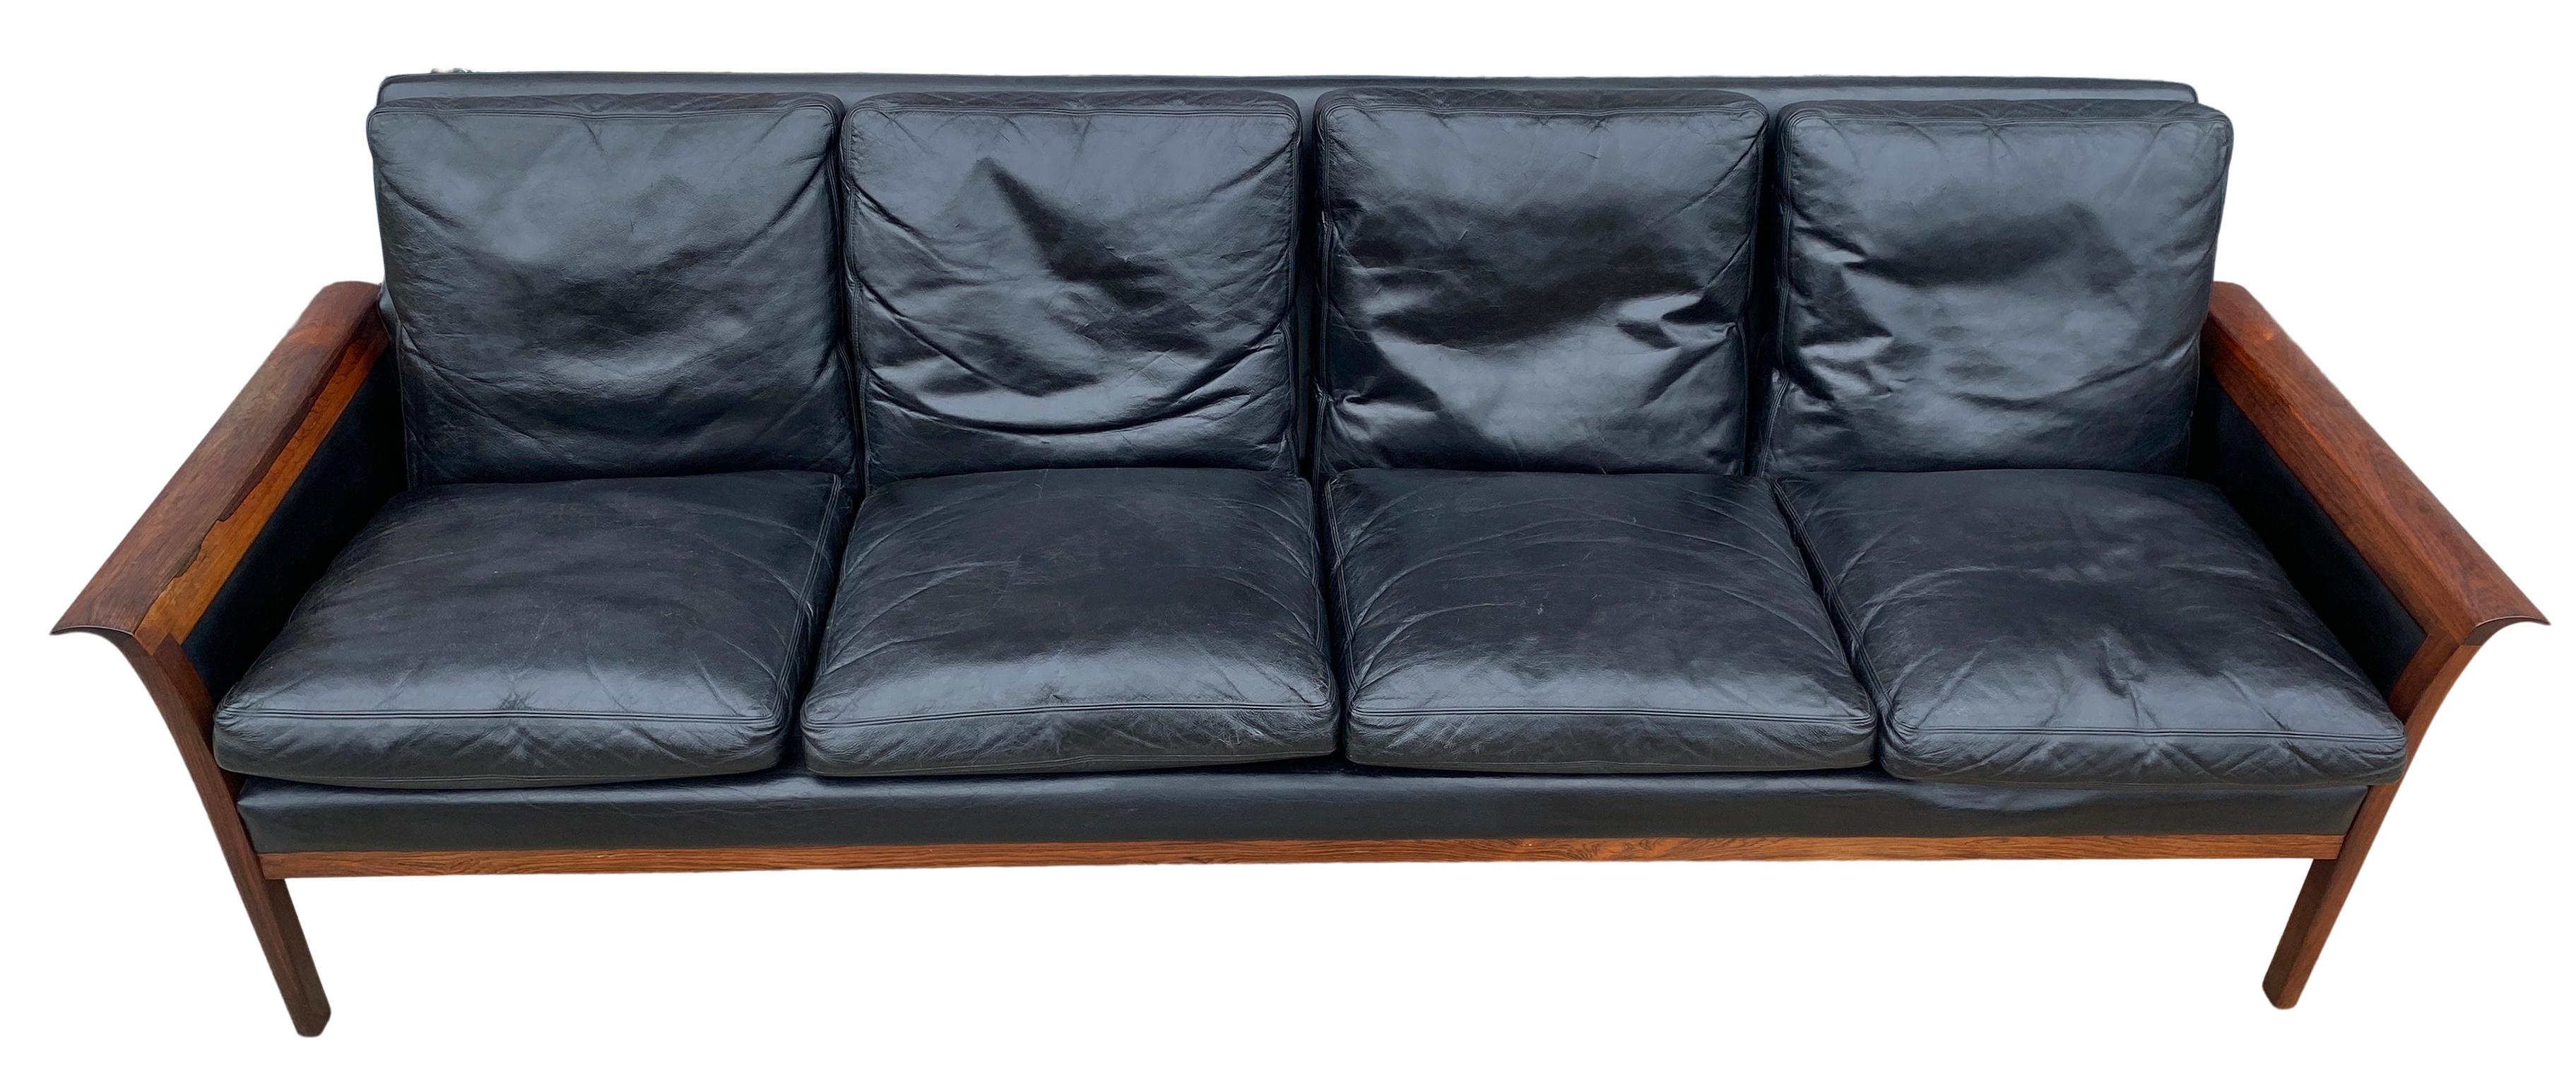 Beautiful Knut Saeter for Vatne Mobler black leather and rosewood four-seat sofa couch. All original Black leather upholstery worn in nicely. Stunning rosewood curved arms and legs. Very solid long 4 seat black leather sofa. Labeled - Vatne Mobler.